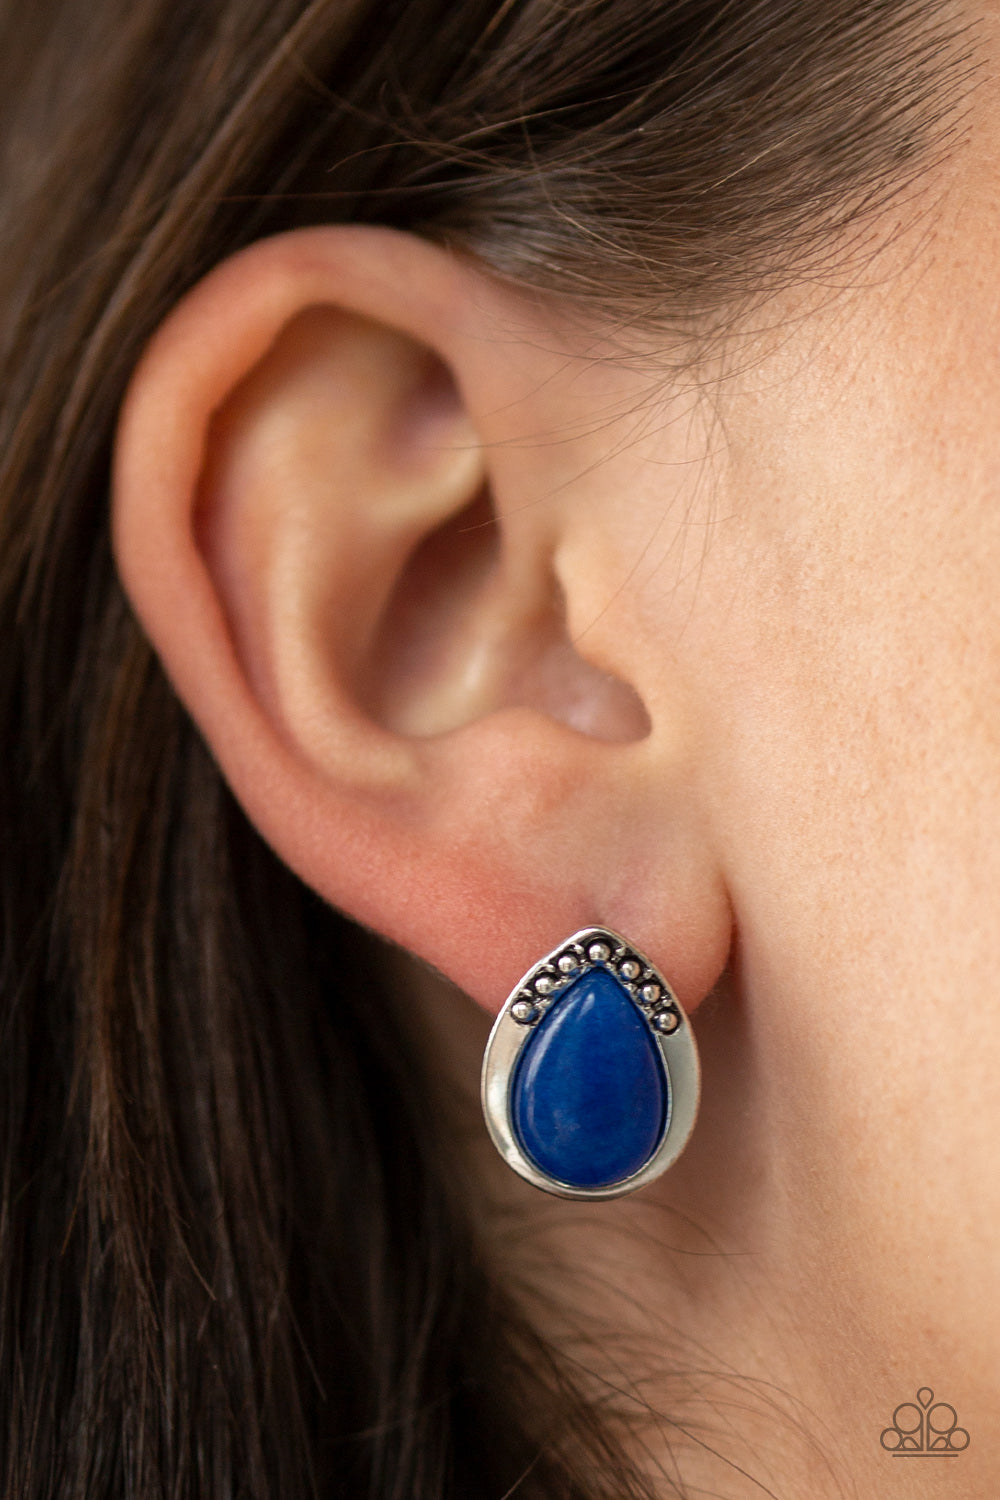 Paparazzi Stone Spectacular Blue Post Earrings $5 Accessories. Free Shipping! #P5PO-BLXX-101XX